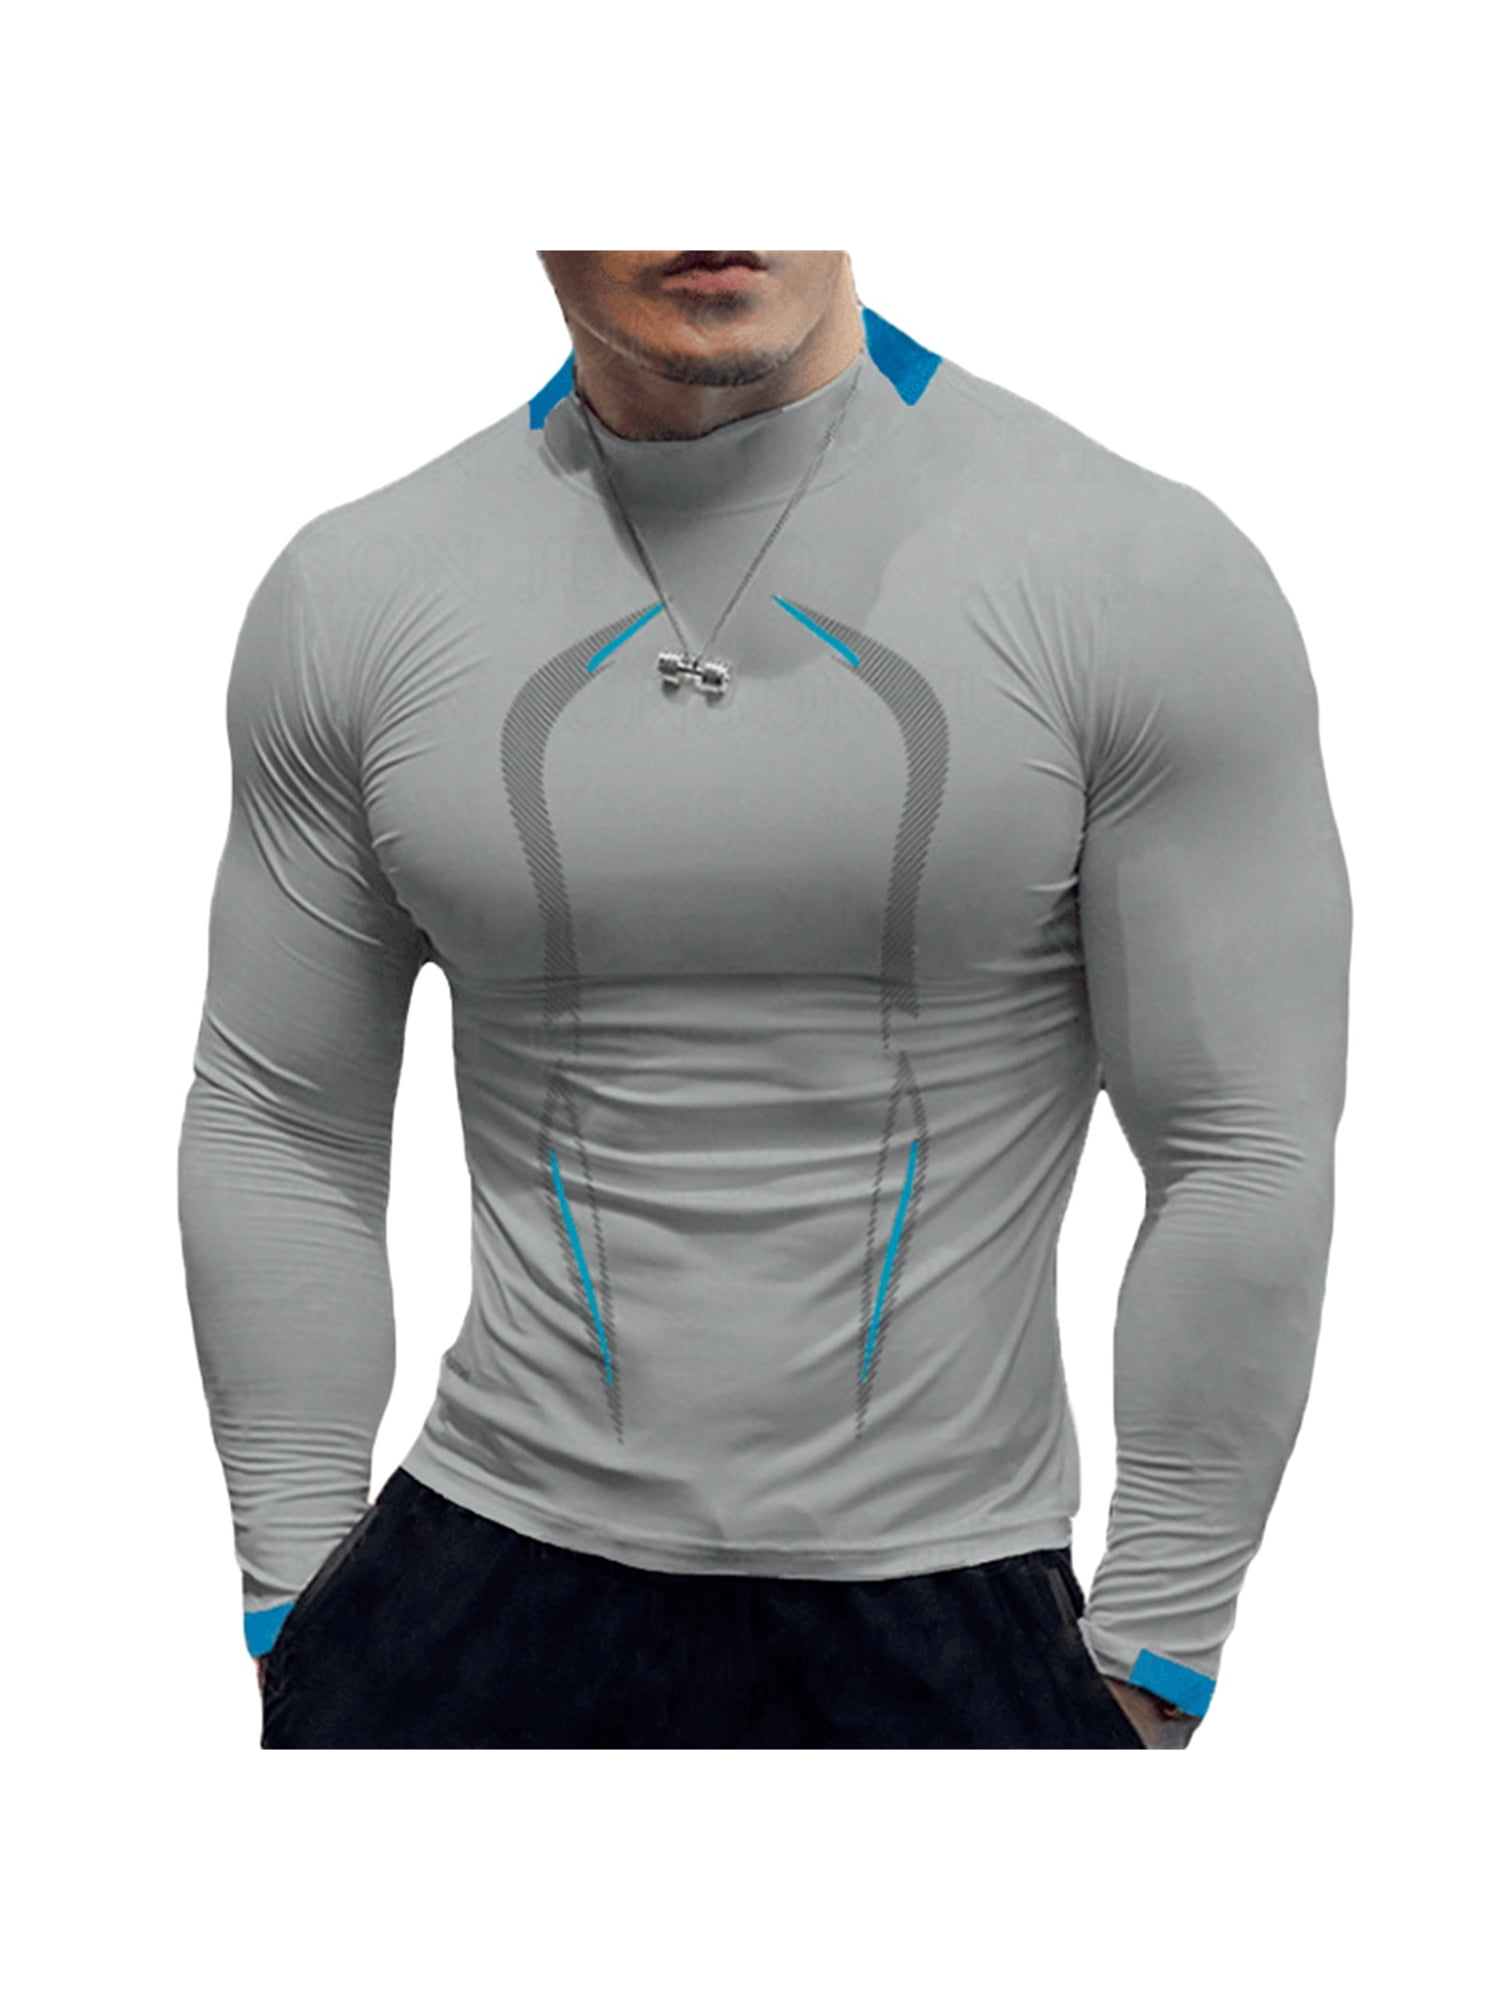 Blotona Men's Long Sleeve Compression Shirts Work Out Shirt Elastic Quick  Drying Tops Fitness Gym Mesh Moisture Wicking Shirts